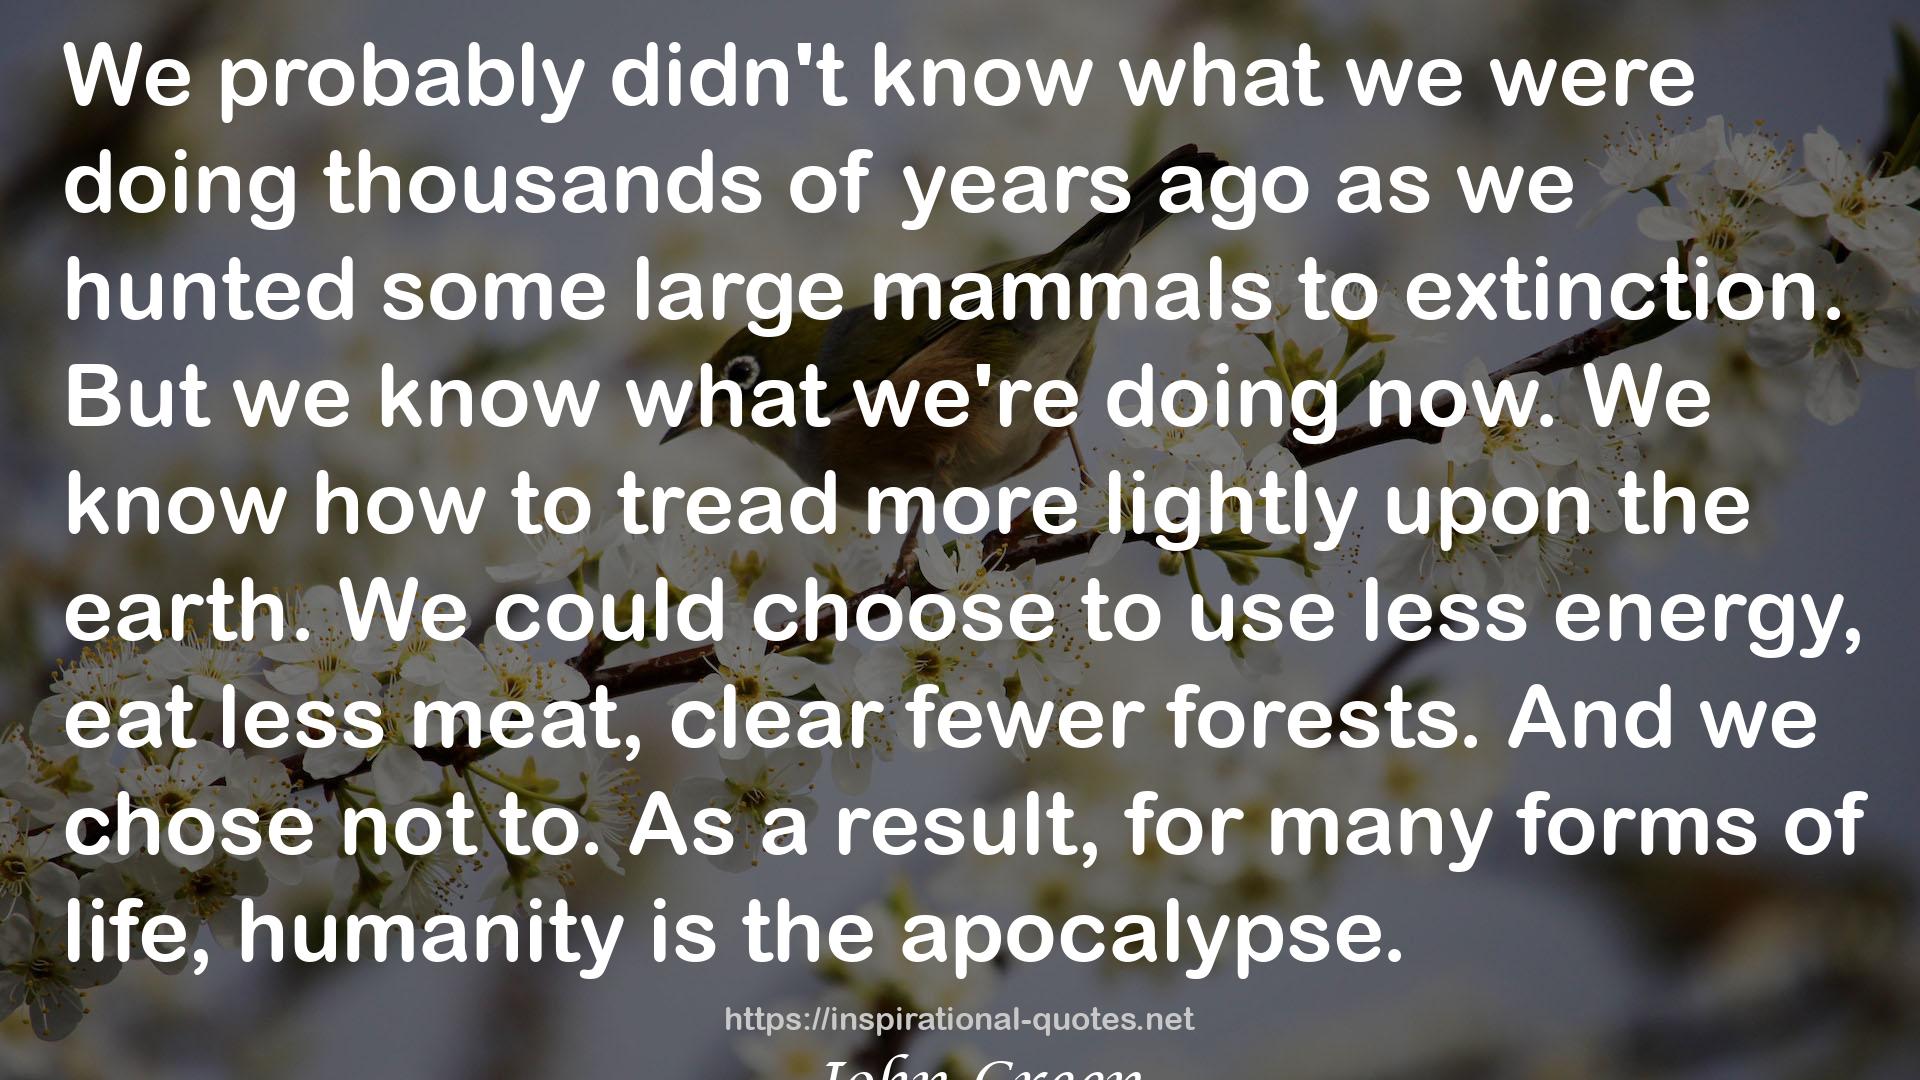 The Anthropocene Reviewed QUOTES